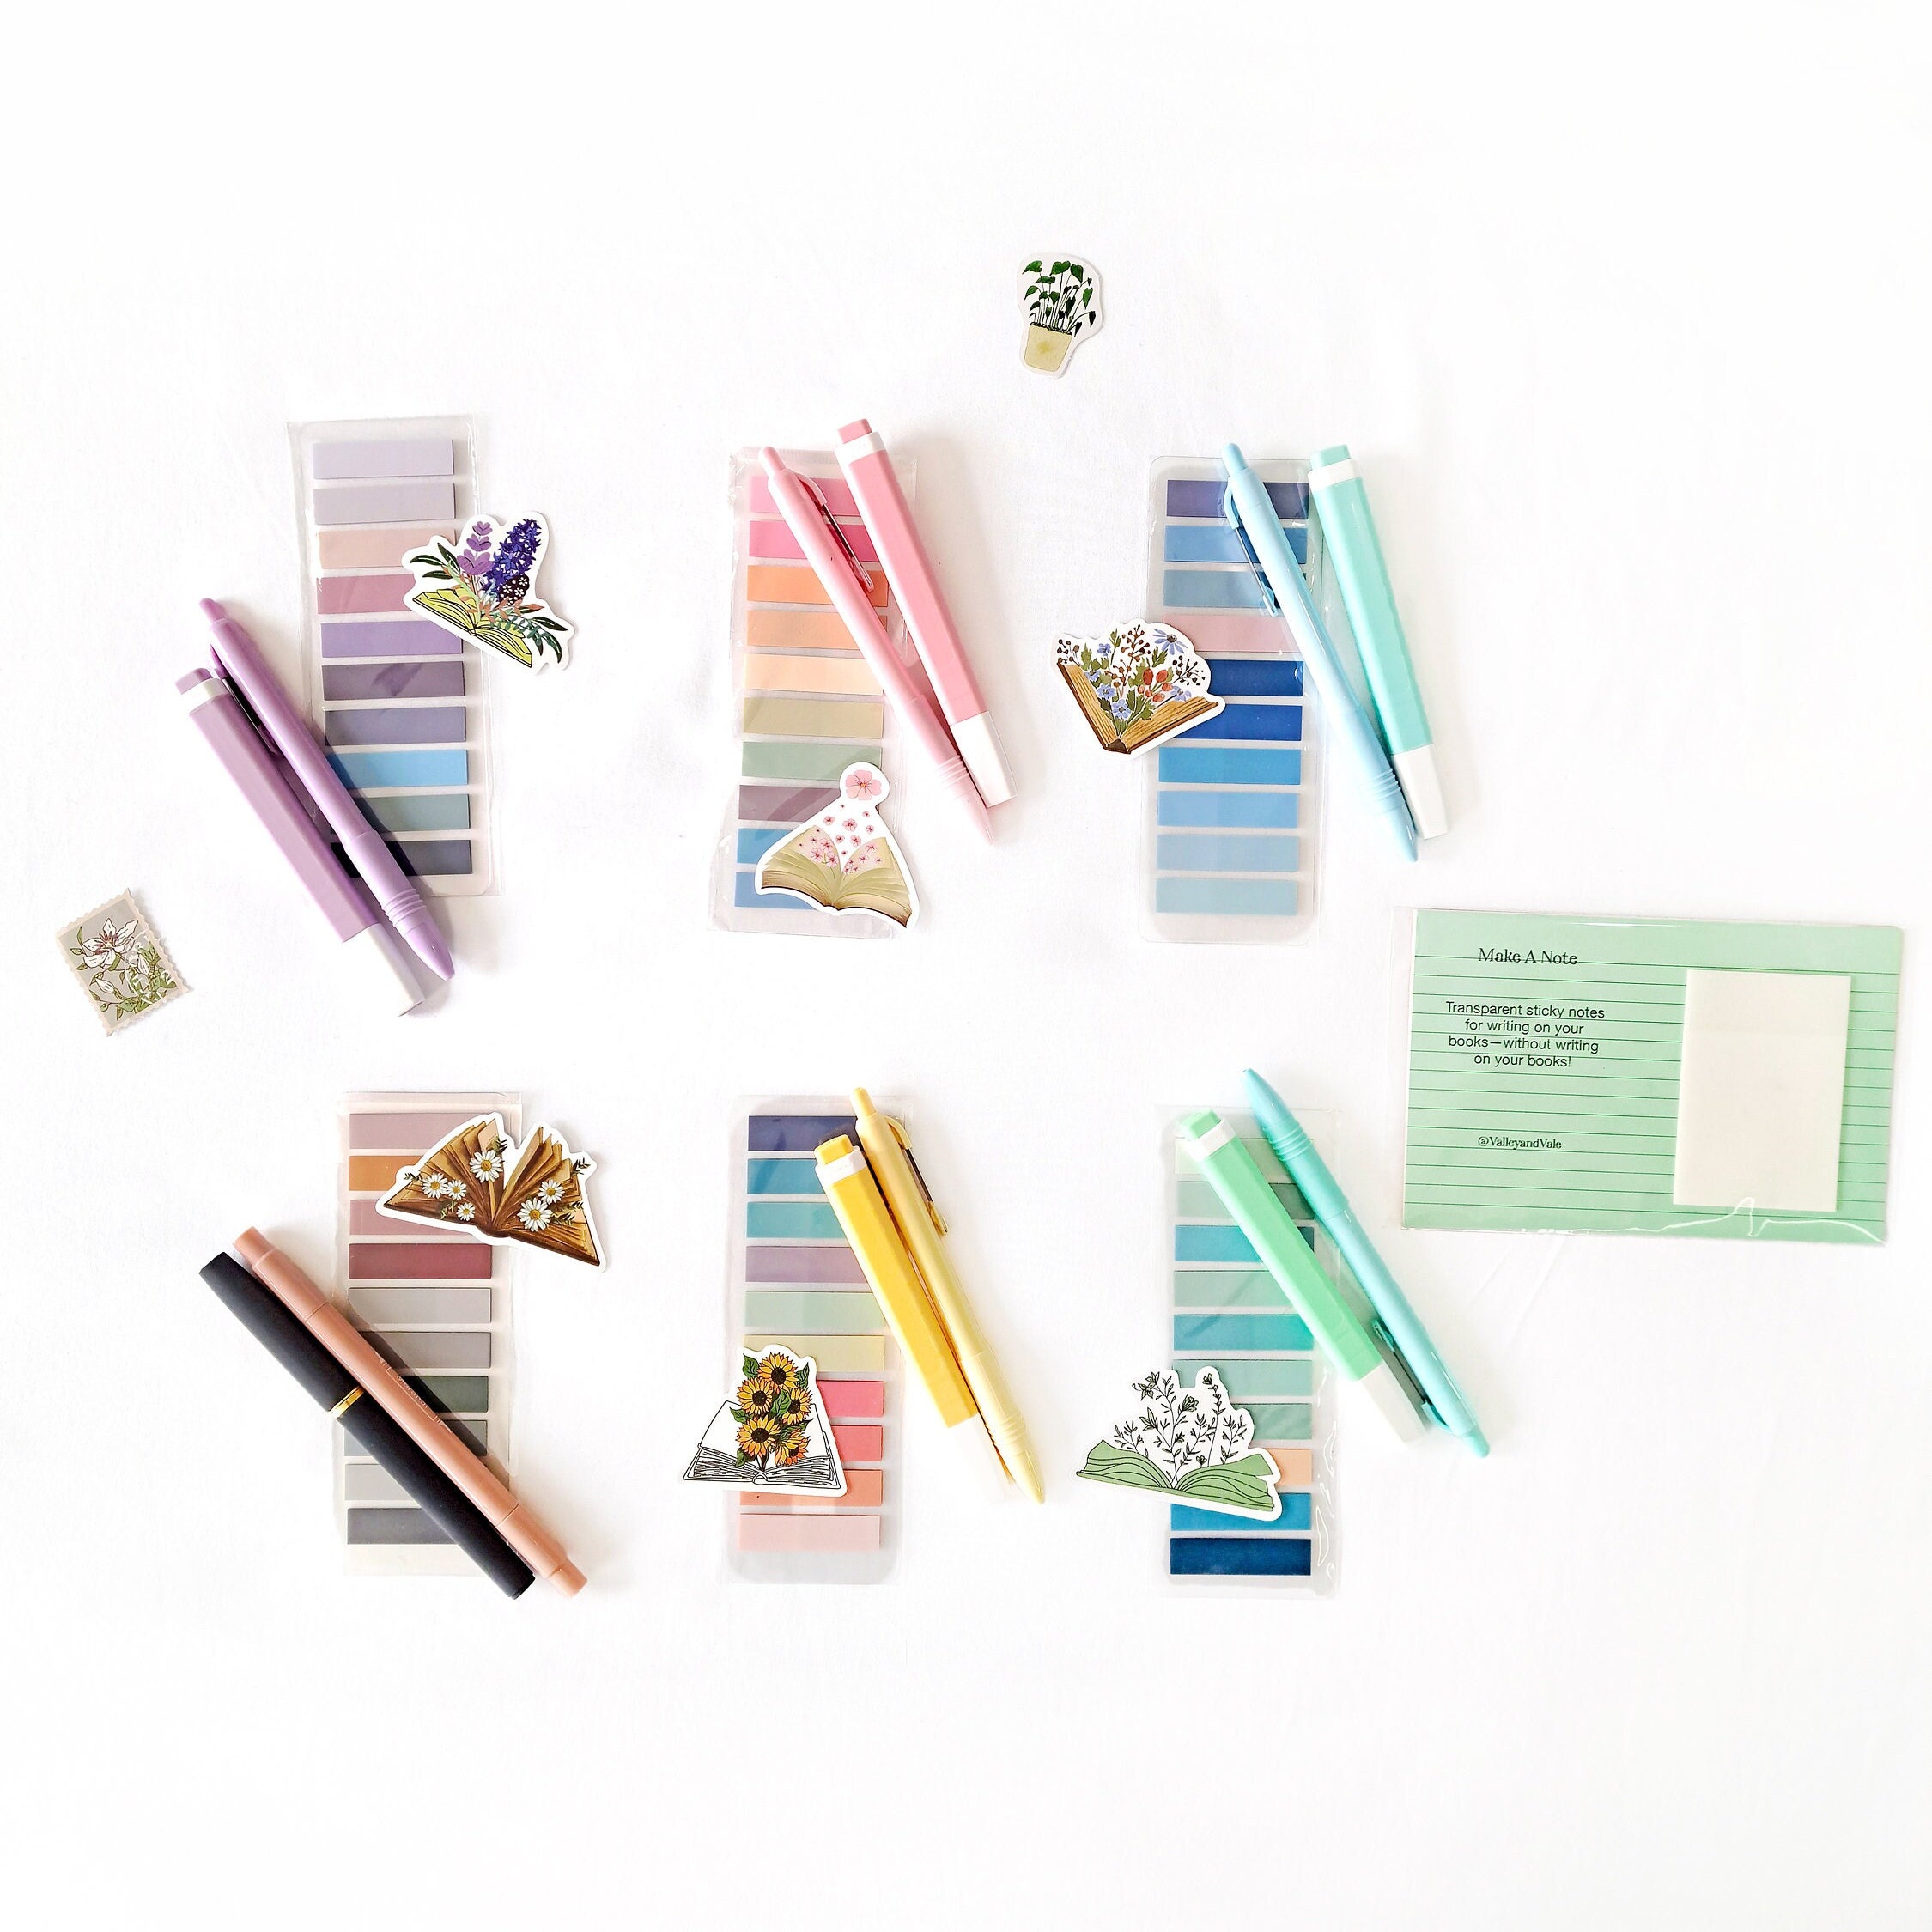 Annotation Kit - Serious About Books – Delight Drop